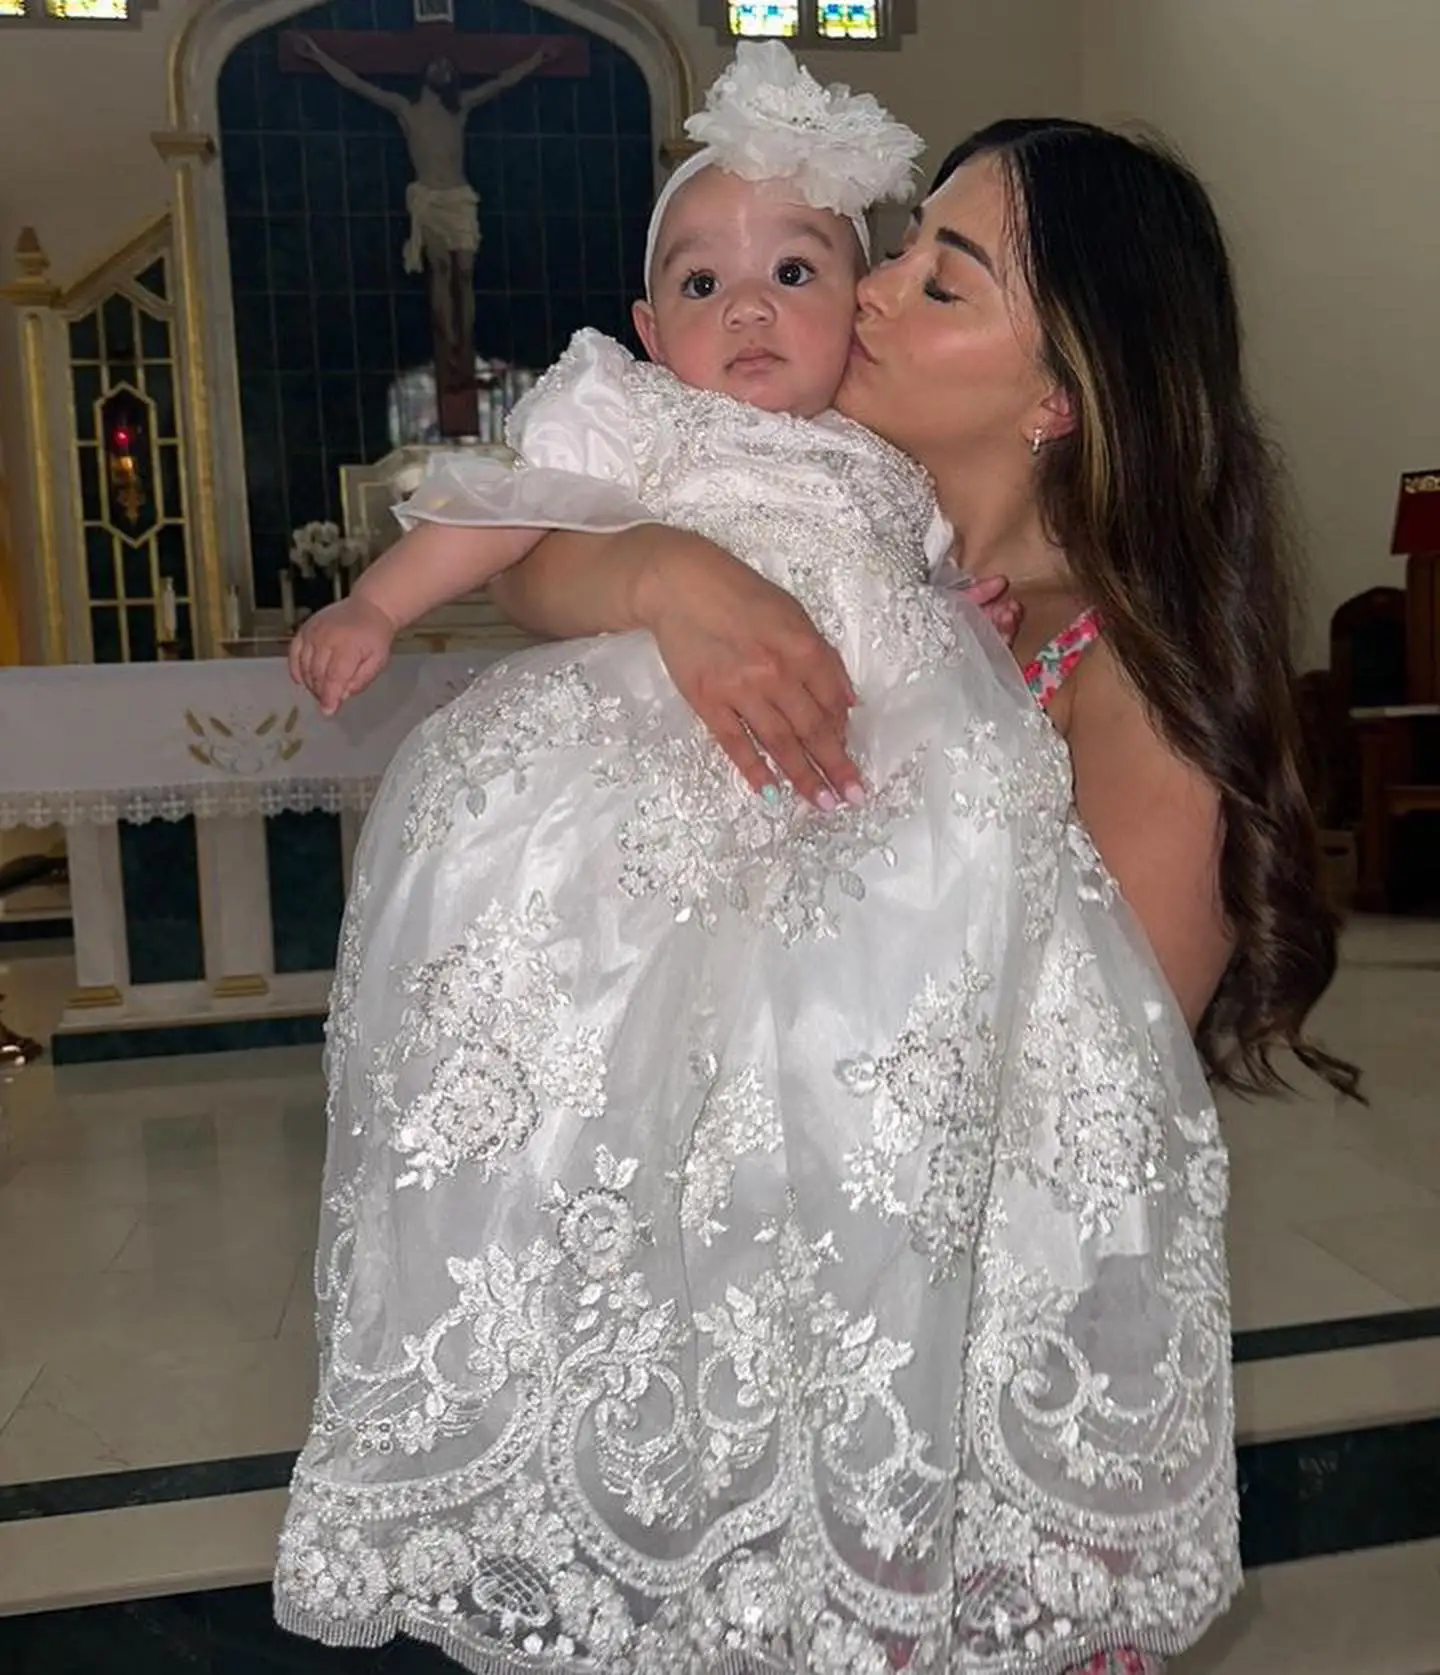 

Luxury White Christening Gowns for Baby Lace Appliqued Beads Ruffles First Communion Dress Infant Toddler Girls Baptism Dresses